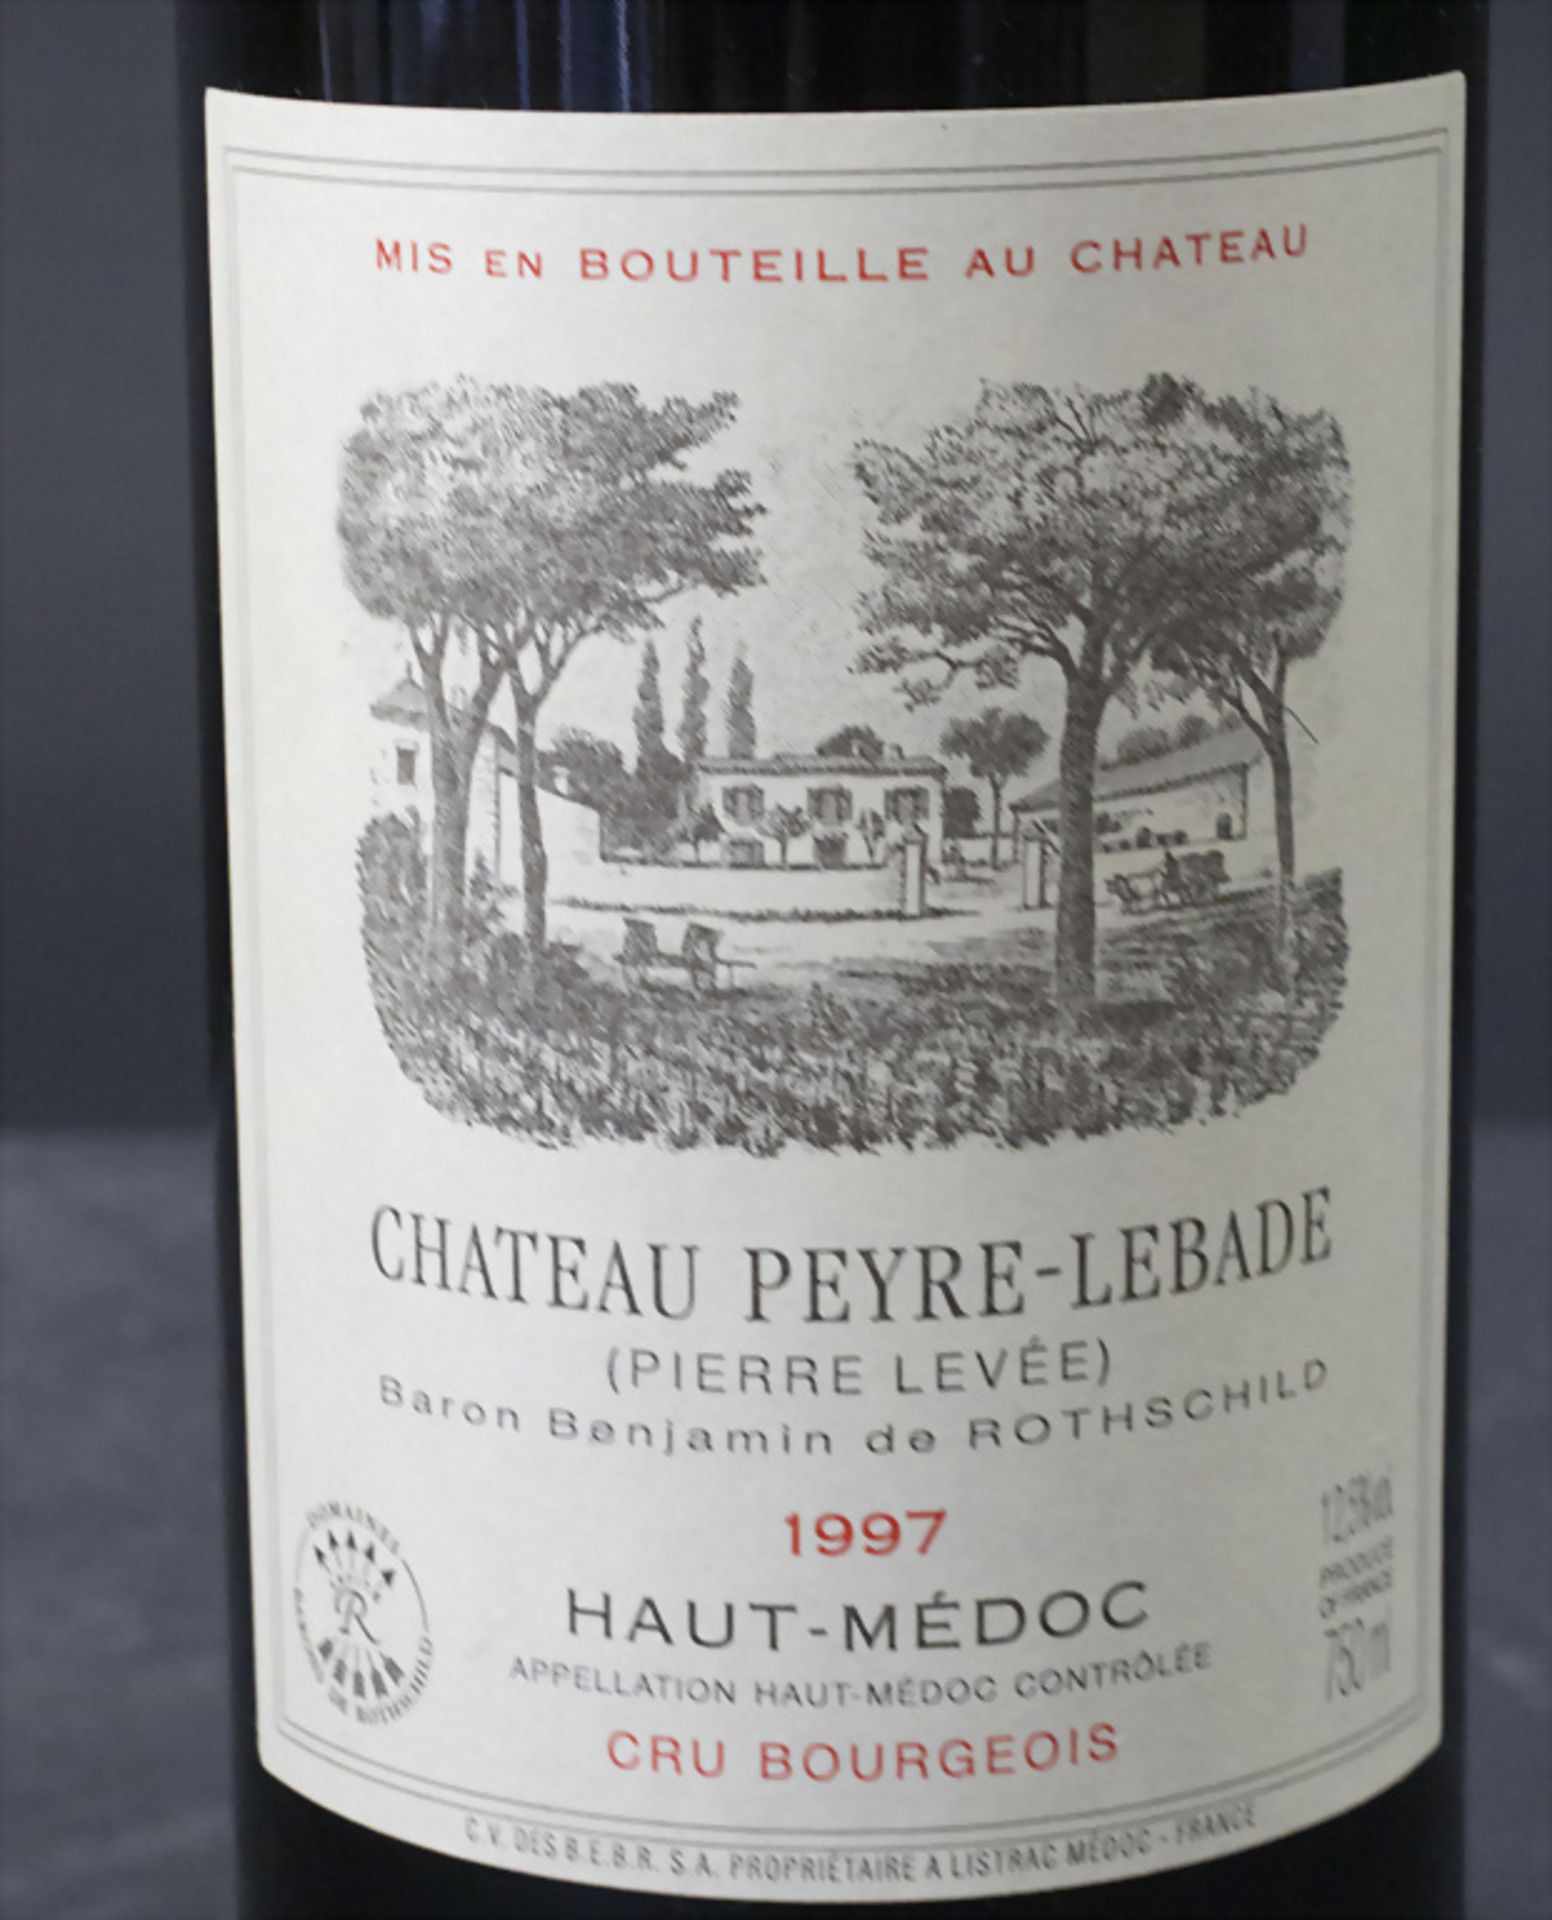 Flasche Rotwein / A bottle of red wine, Haut-Médoc, 1997 - Image 2 of 3